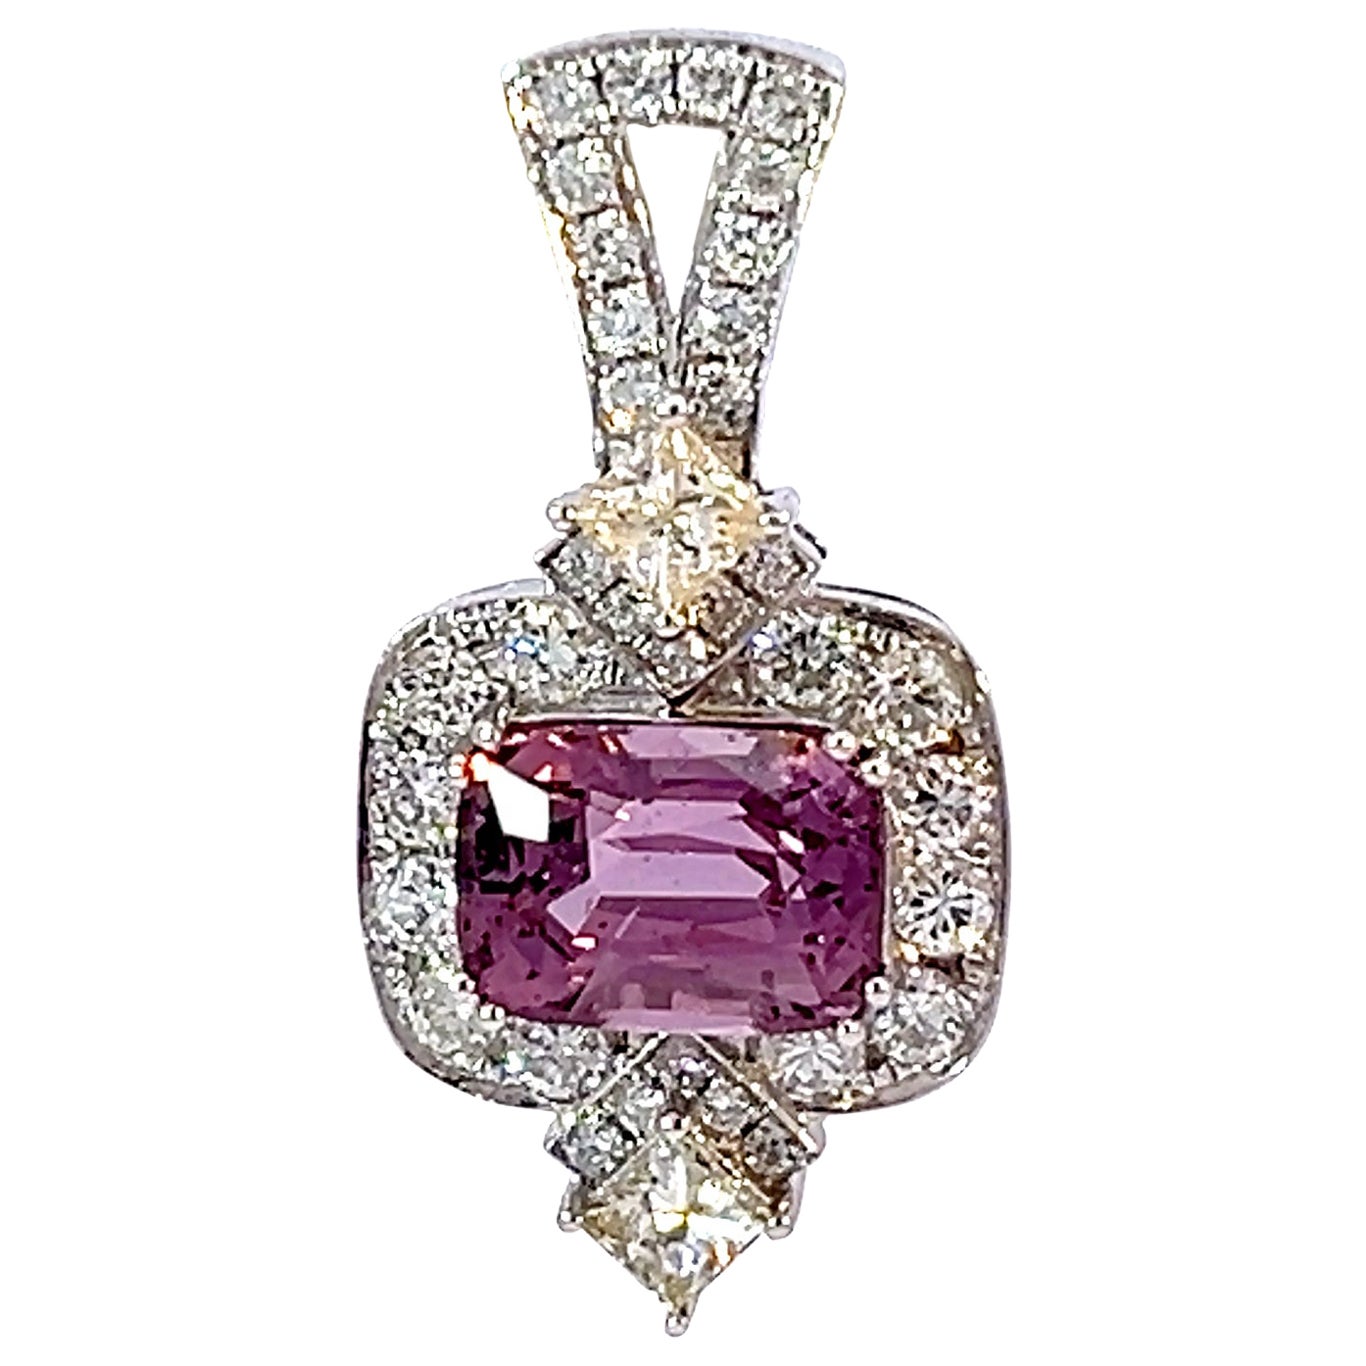 Limited Classic 14k Gold w/ 1.45 ct Purple Lavender spinel .68ct Diamond Pendant For Sale